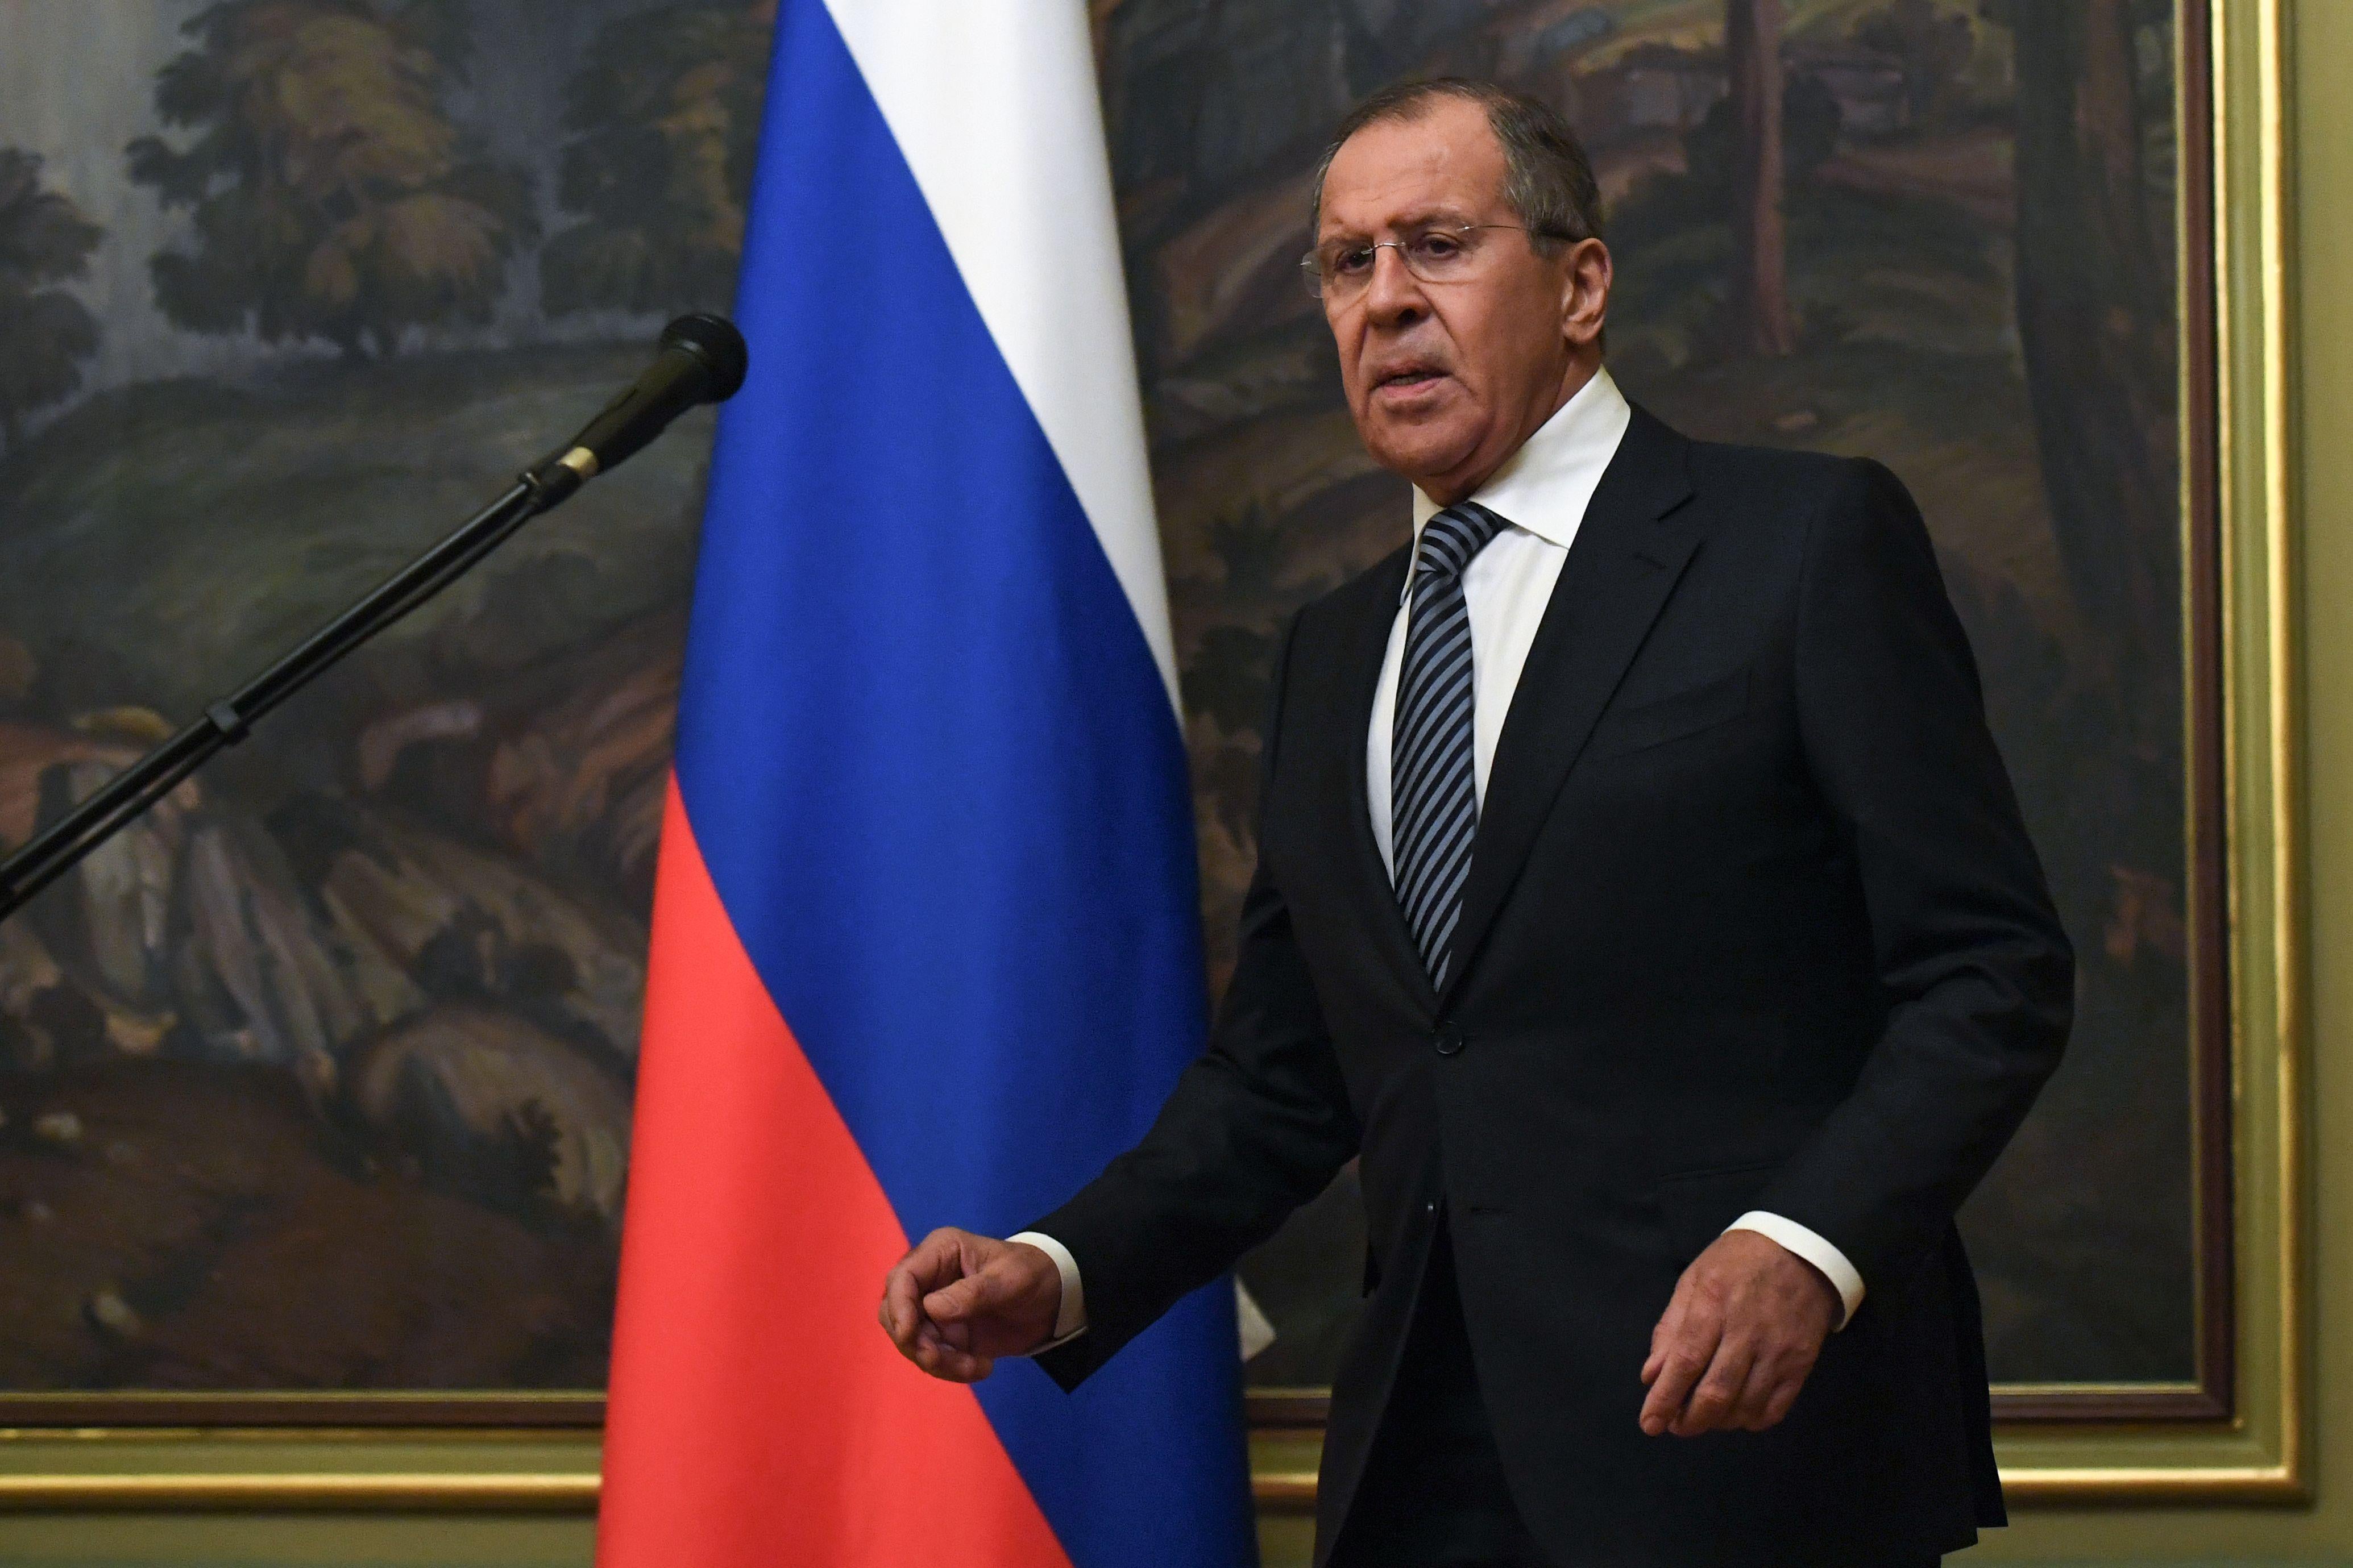 Russian Foreign Minister Sergei Lavrov announces the decision to expel 60 US diplomats and close its consulate in Saint Petersburg in a tit-for-tat expulsion.